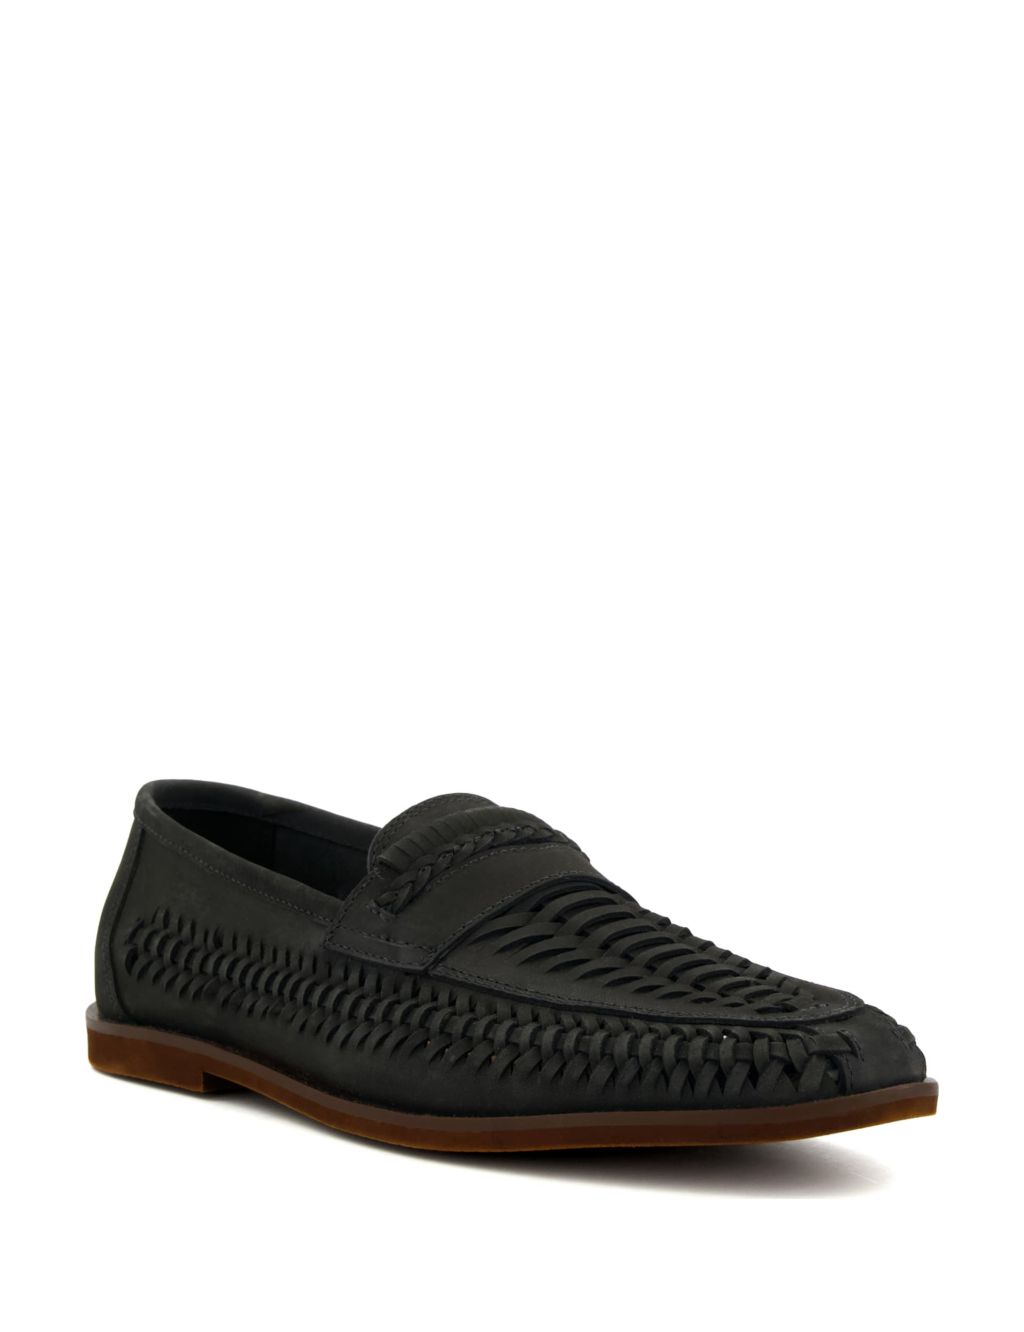 Leather Woven Flat Loafers image 2